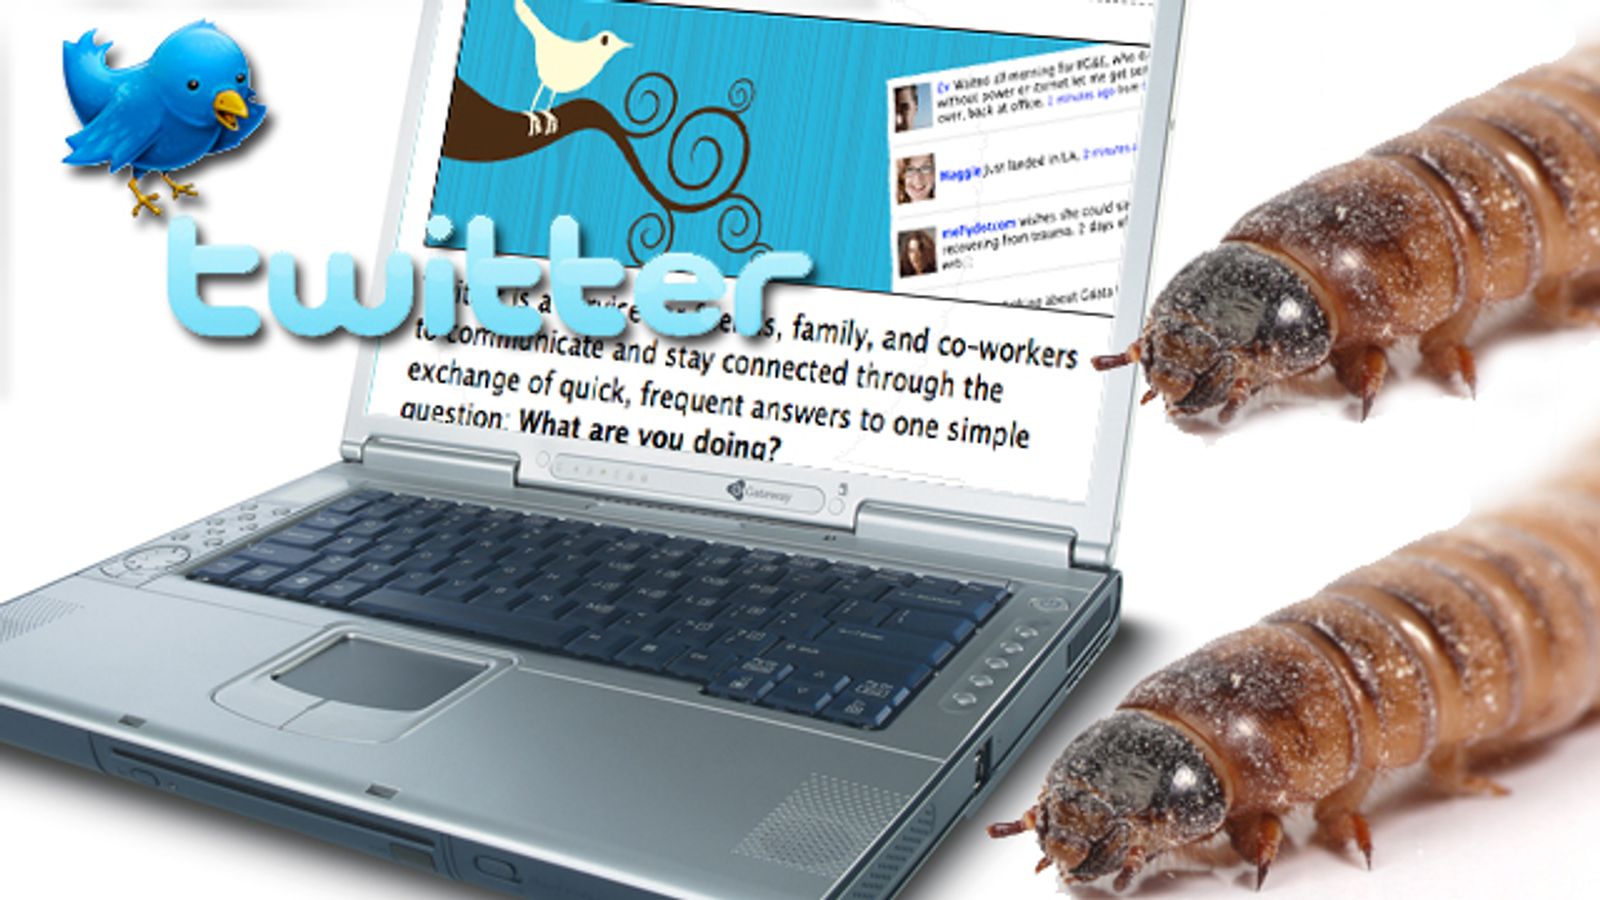 Twitter Hit by Worms Over Weekend